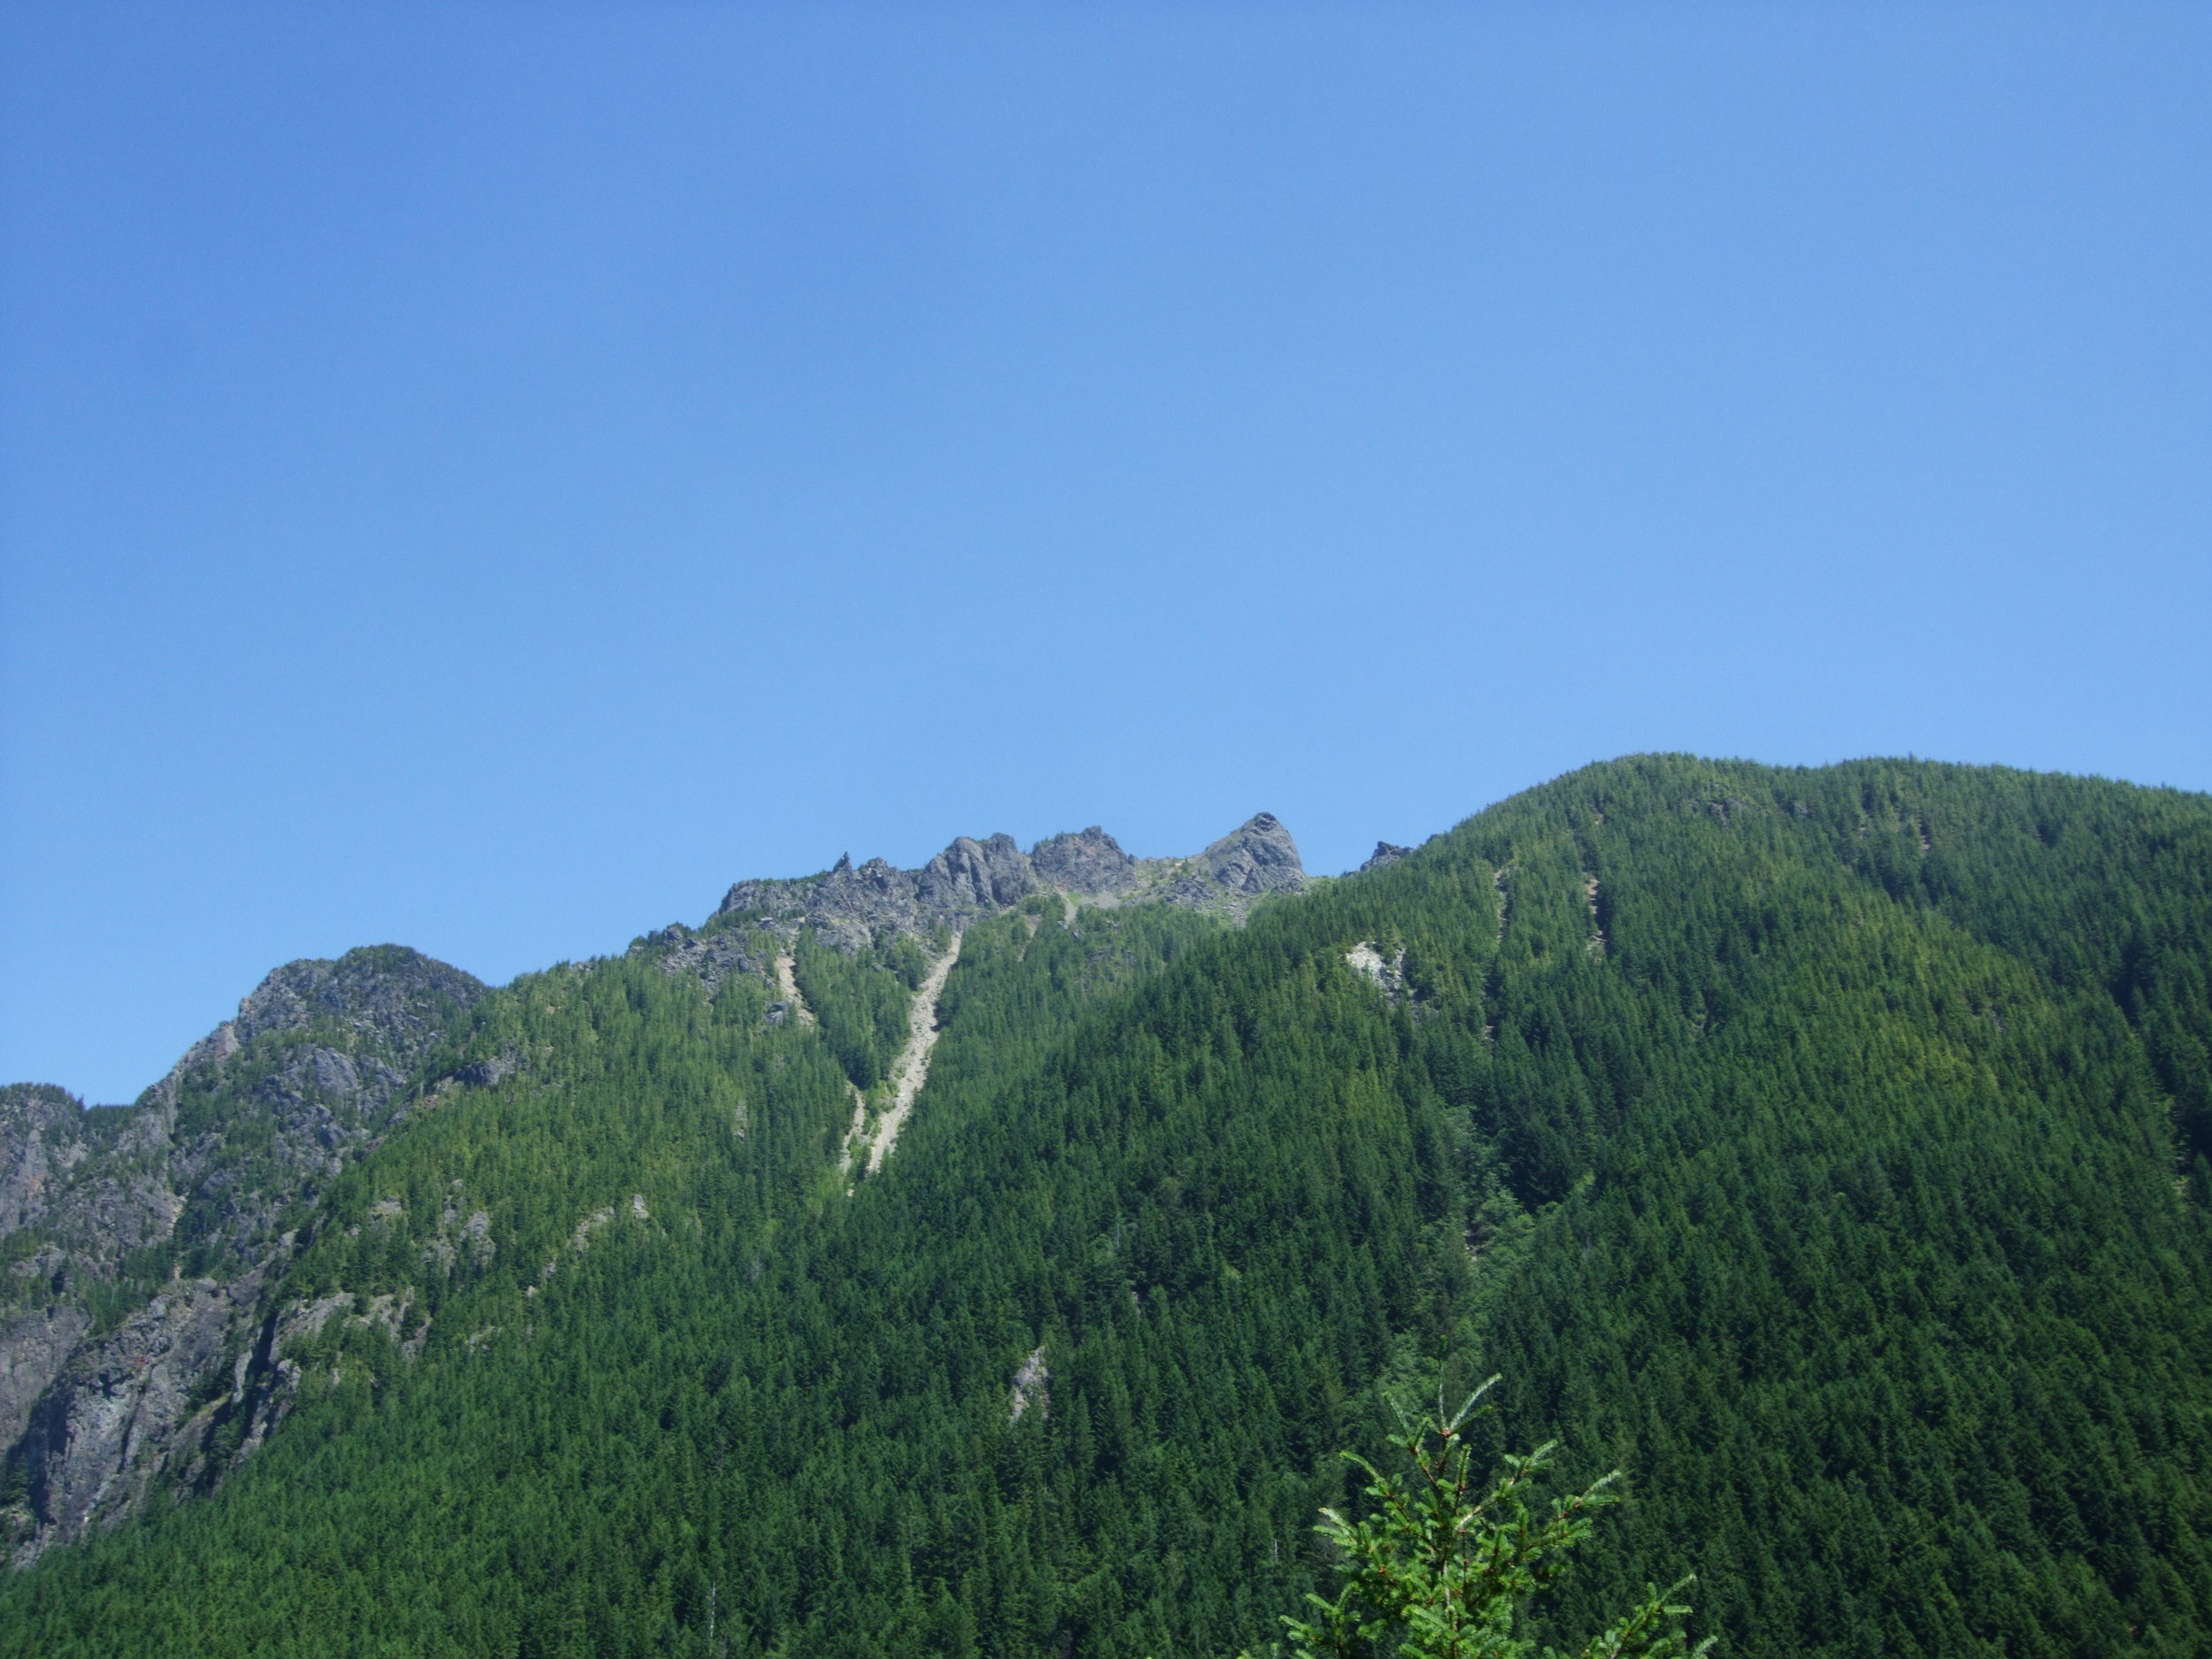  Mt. Si from Little Si, June 2013 